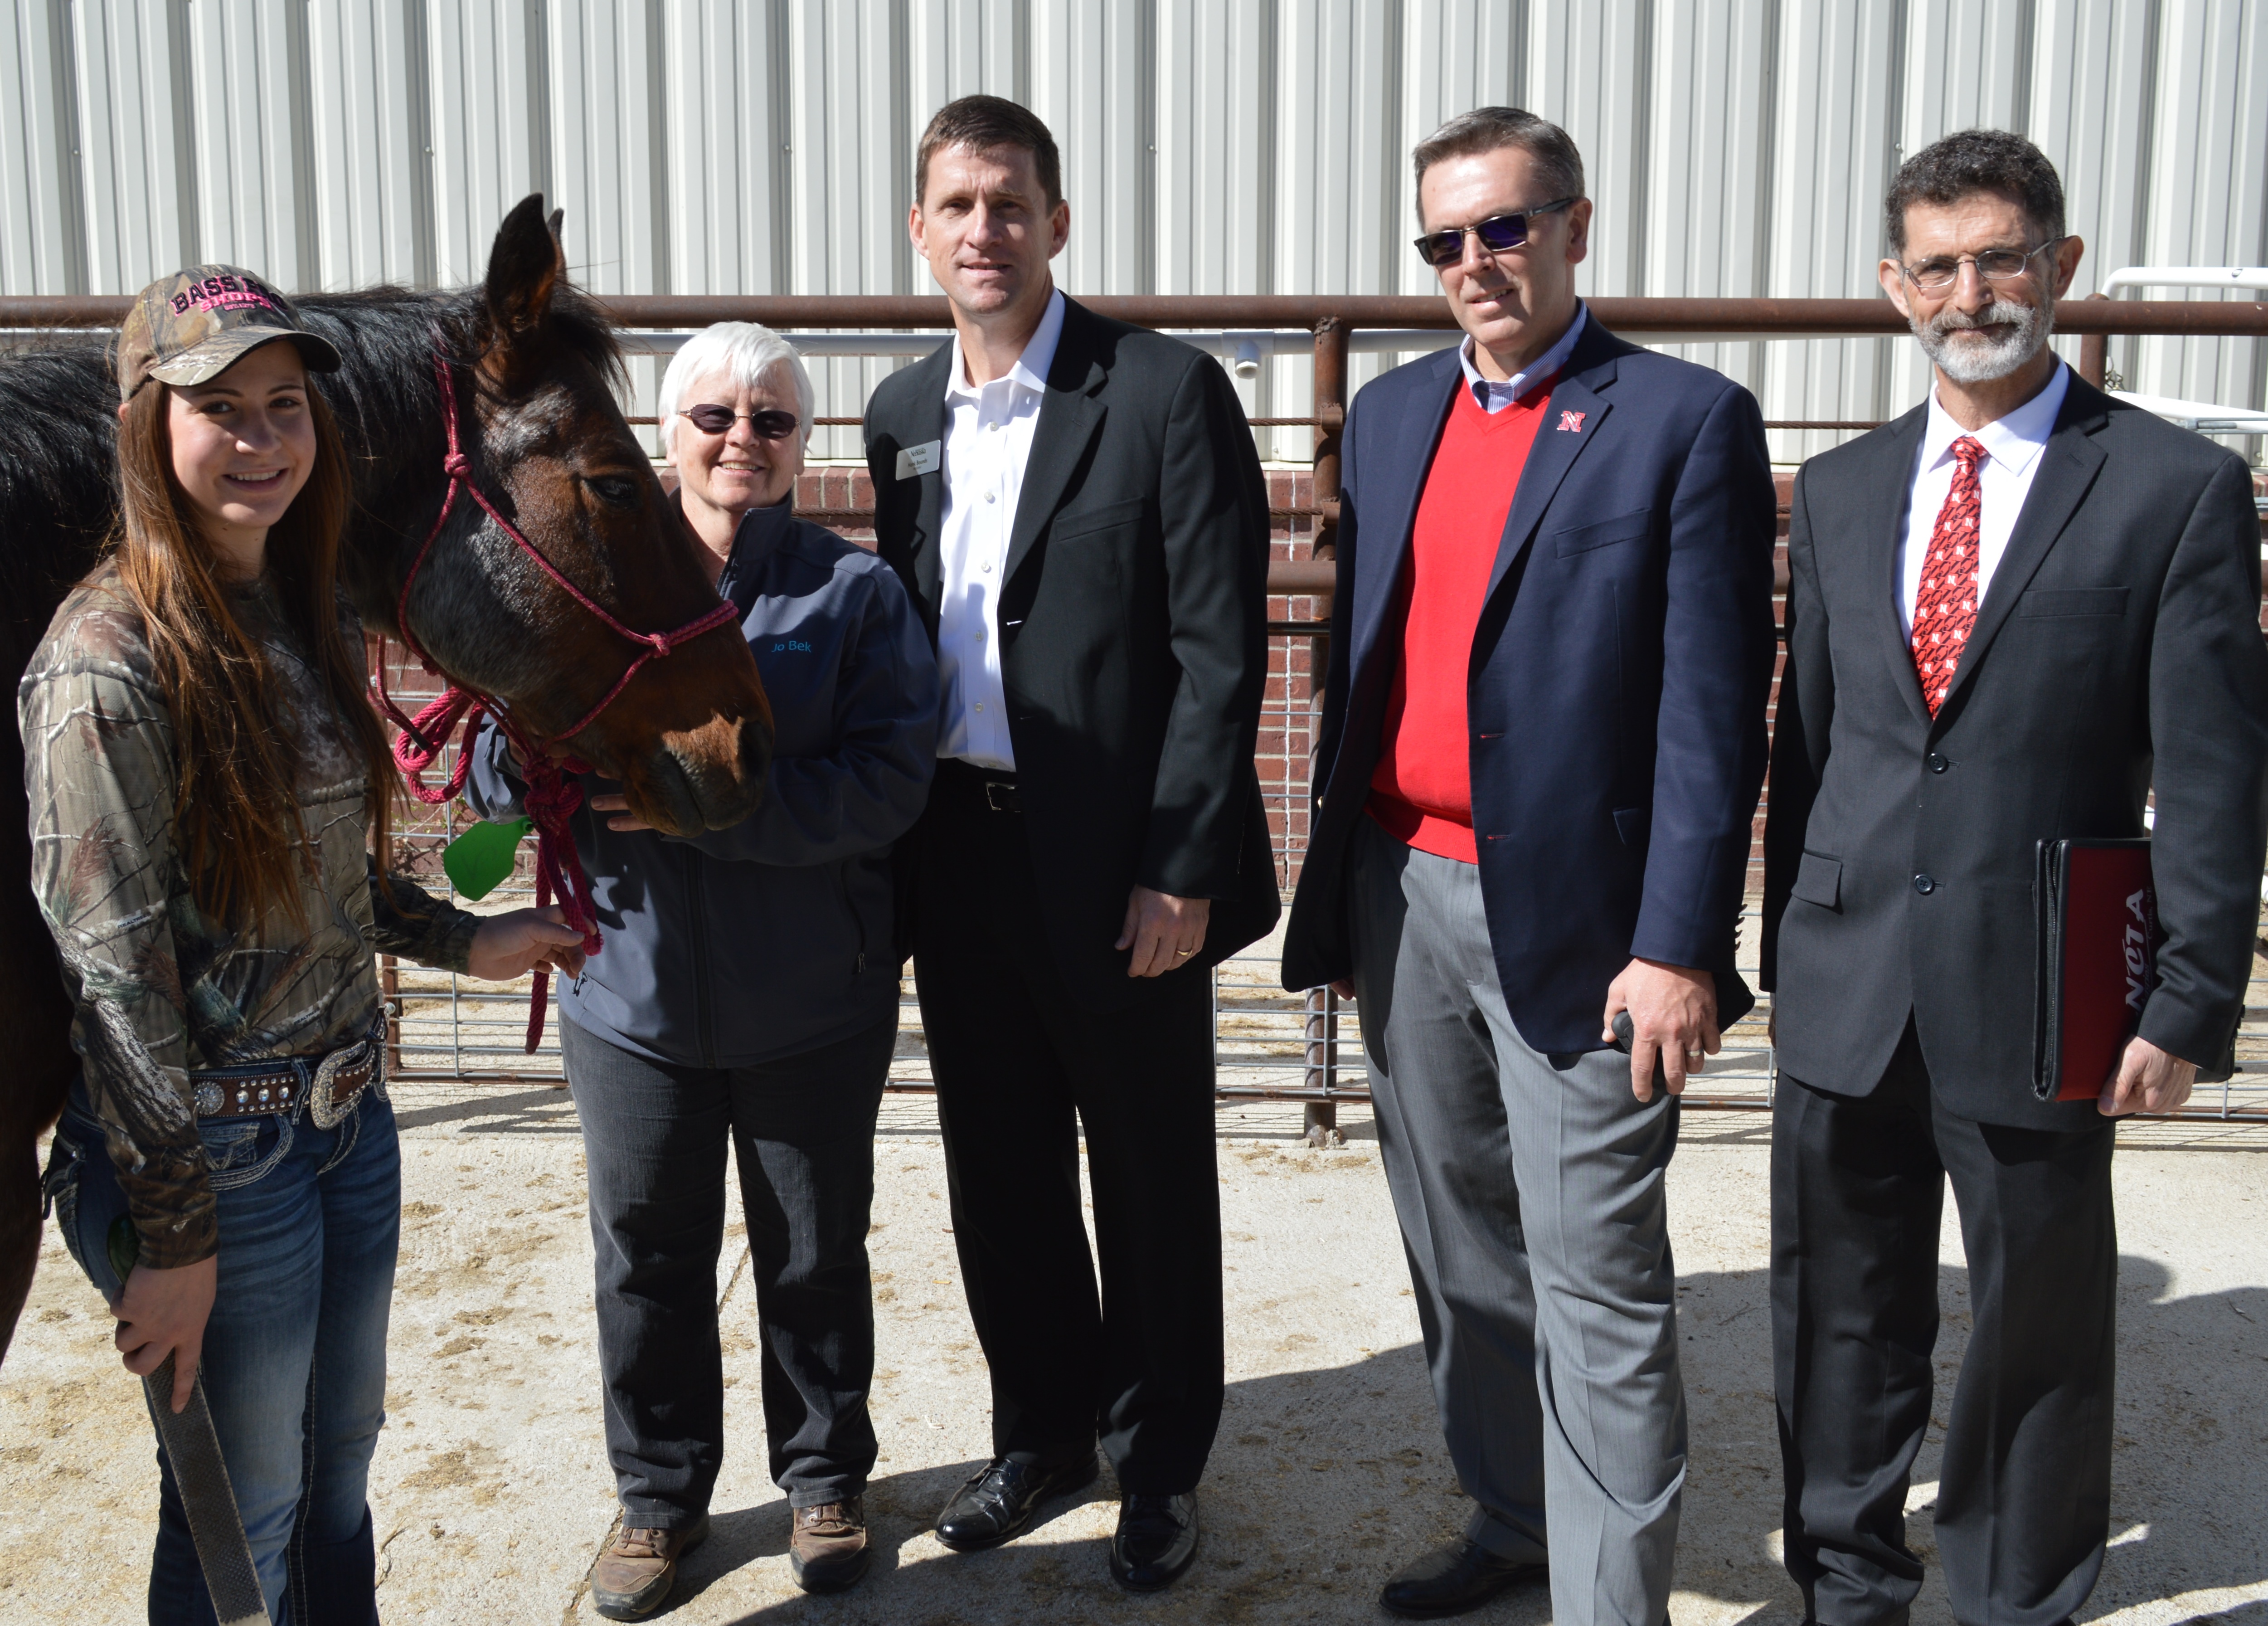 University of Nebraska President Hank Bounds (center) and UNL Chancellor-elect Ronnie Green (second to right) learn about NCTA equine programs, April, 2015.